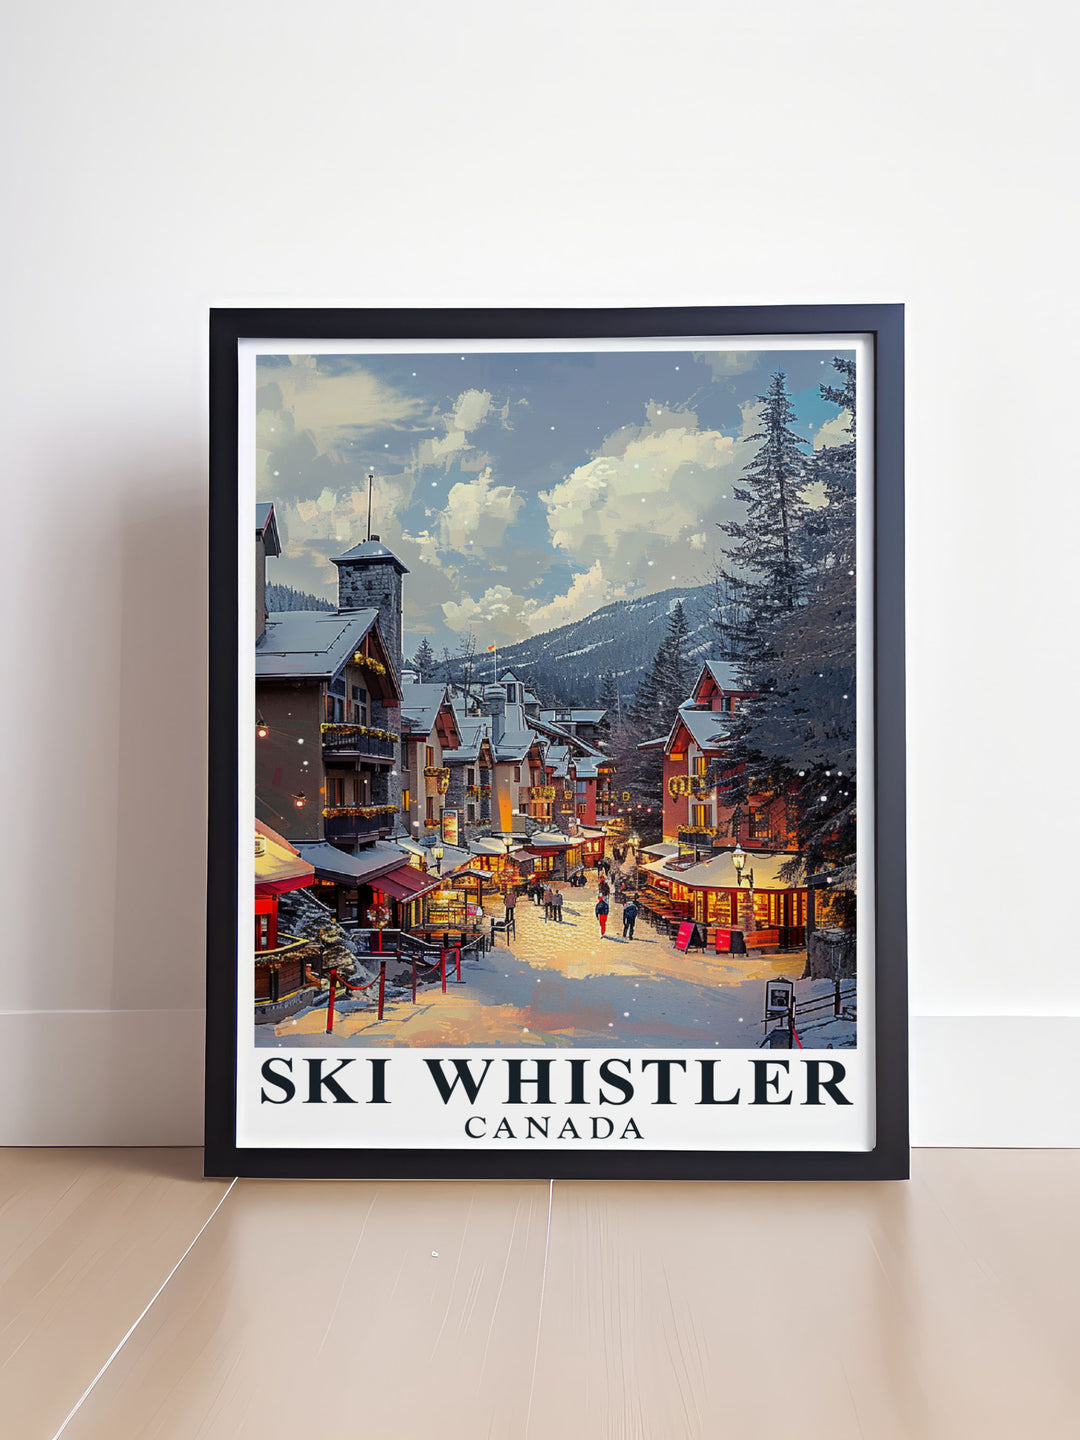 Experience the breathtaking landscapes of Whistler with this detailed poster featuring the ski resort and village, capturing the essence of a winter wonderland and its exhilarating ski slopes.